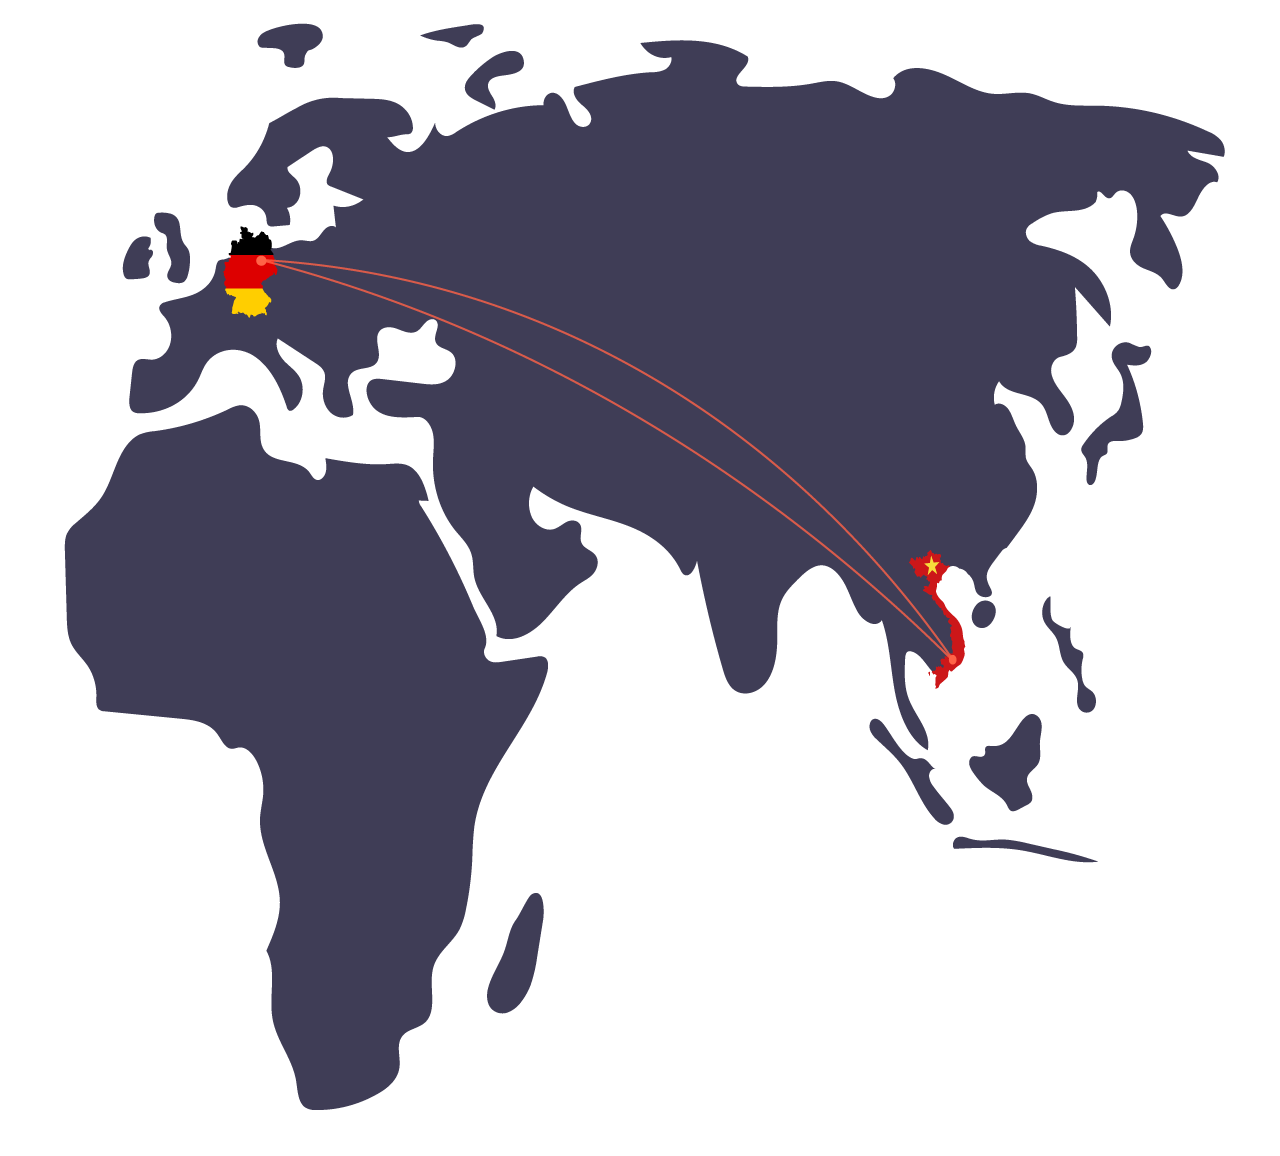 Our headquarters are based in Berlin and Saigon.